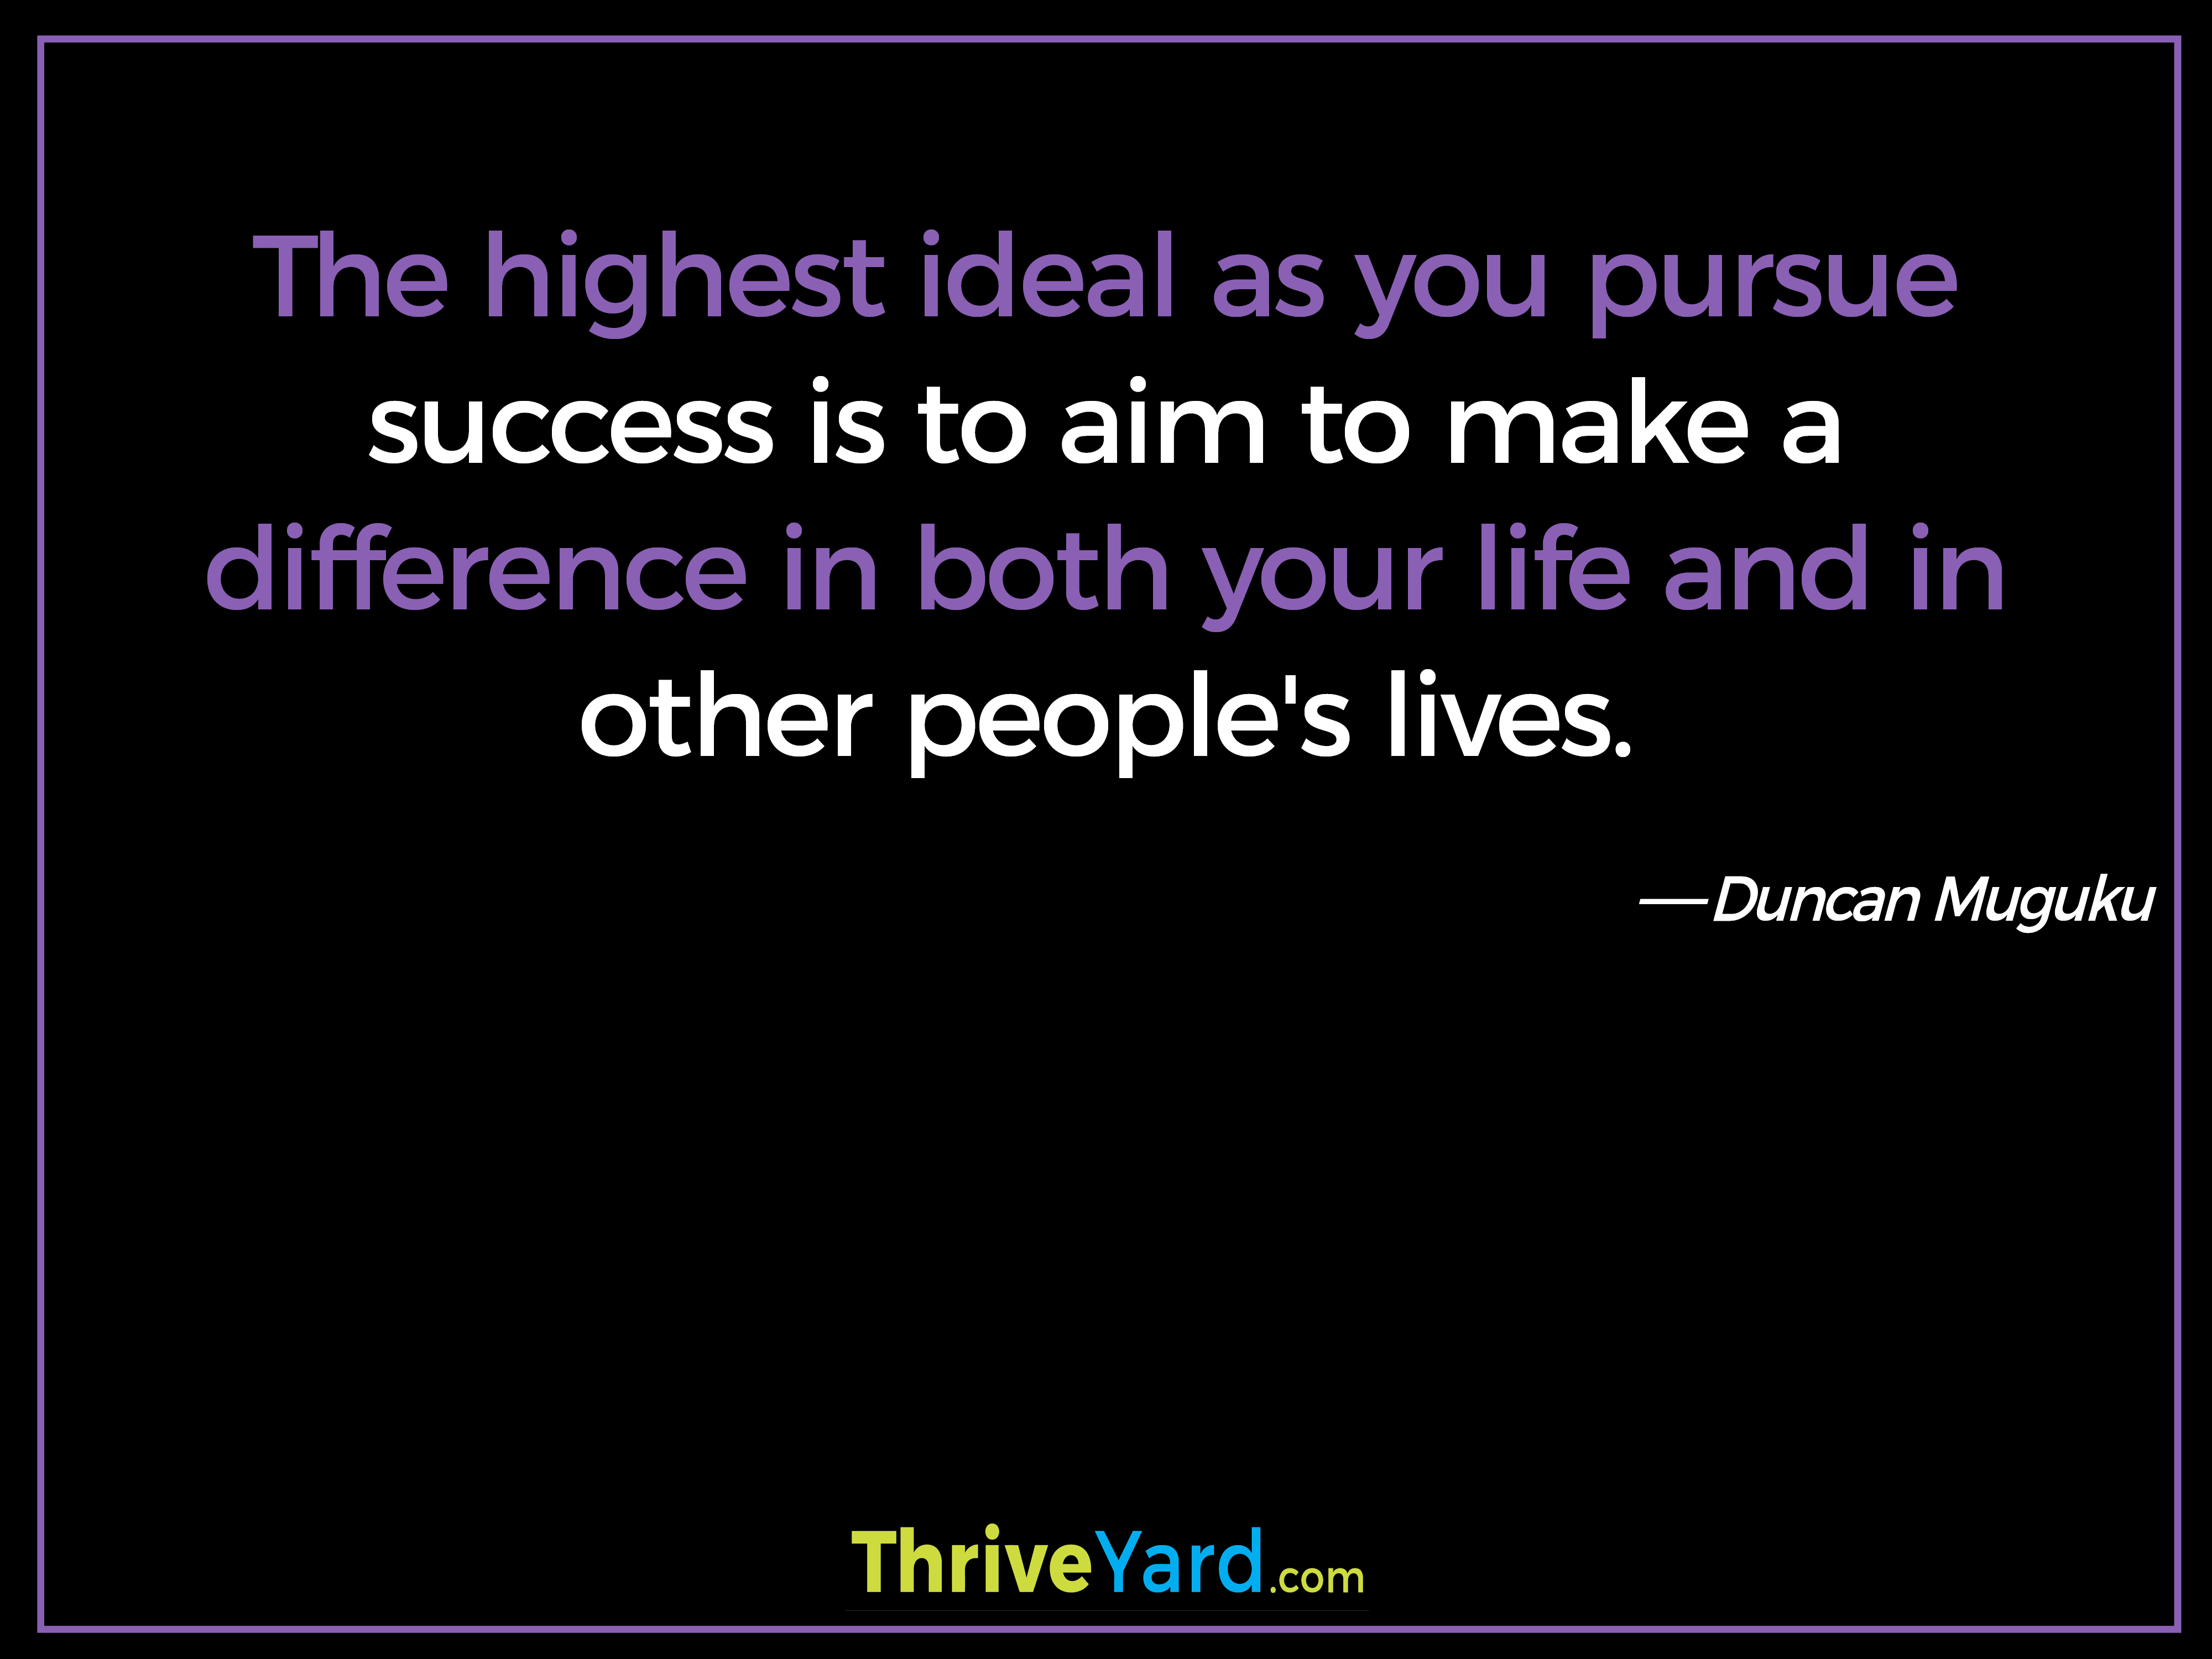 The highest ideal as you pursue success is to aim to make a difference in both your life and in other people's lives. - Duncan Muguku